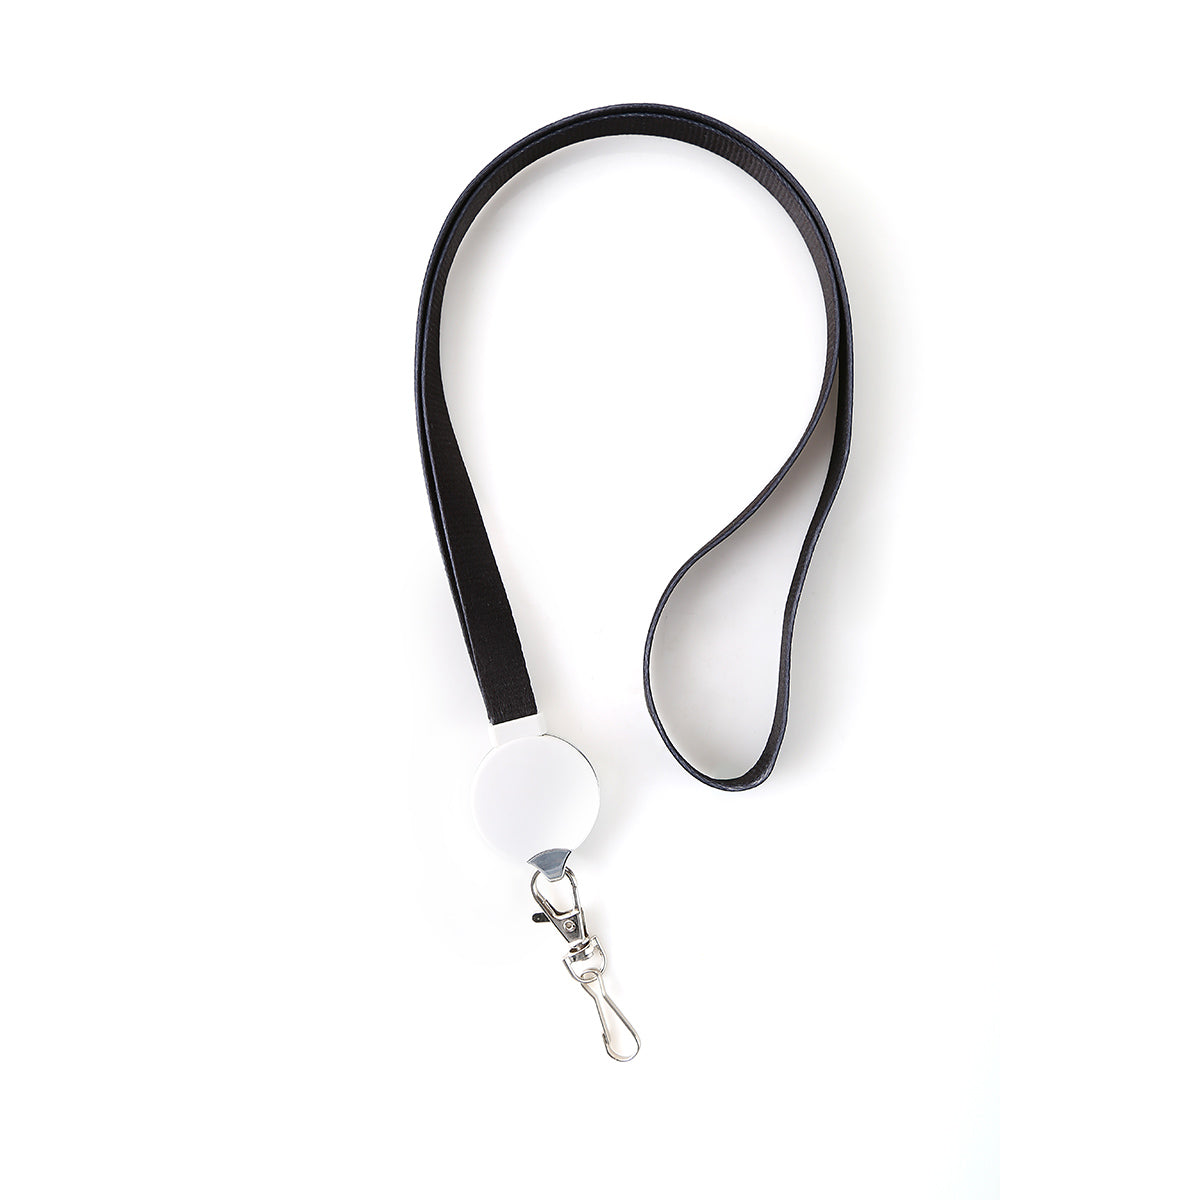 Nathanel 3 in 1 Fast Charge Lanyard Cable